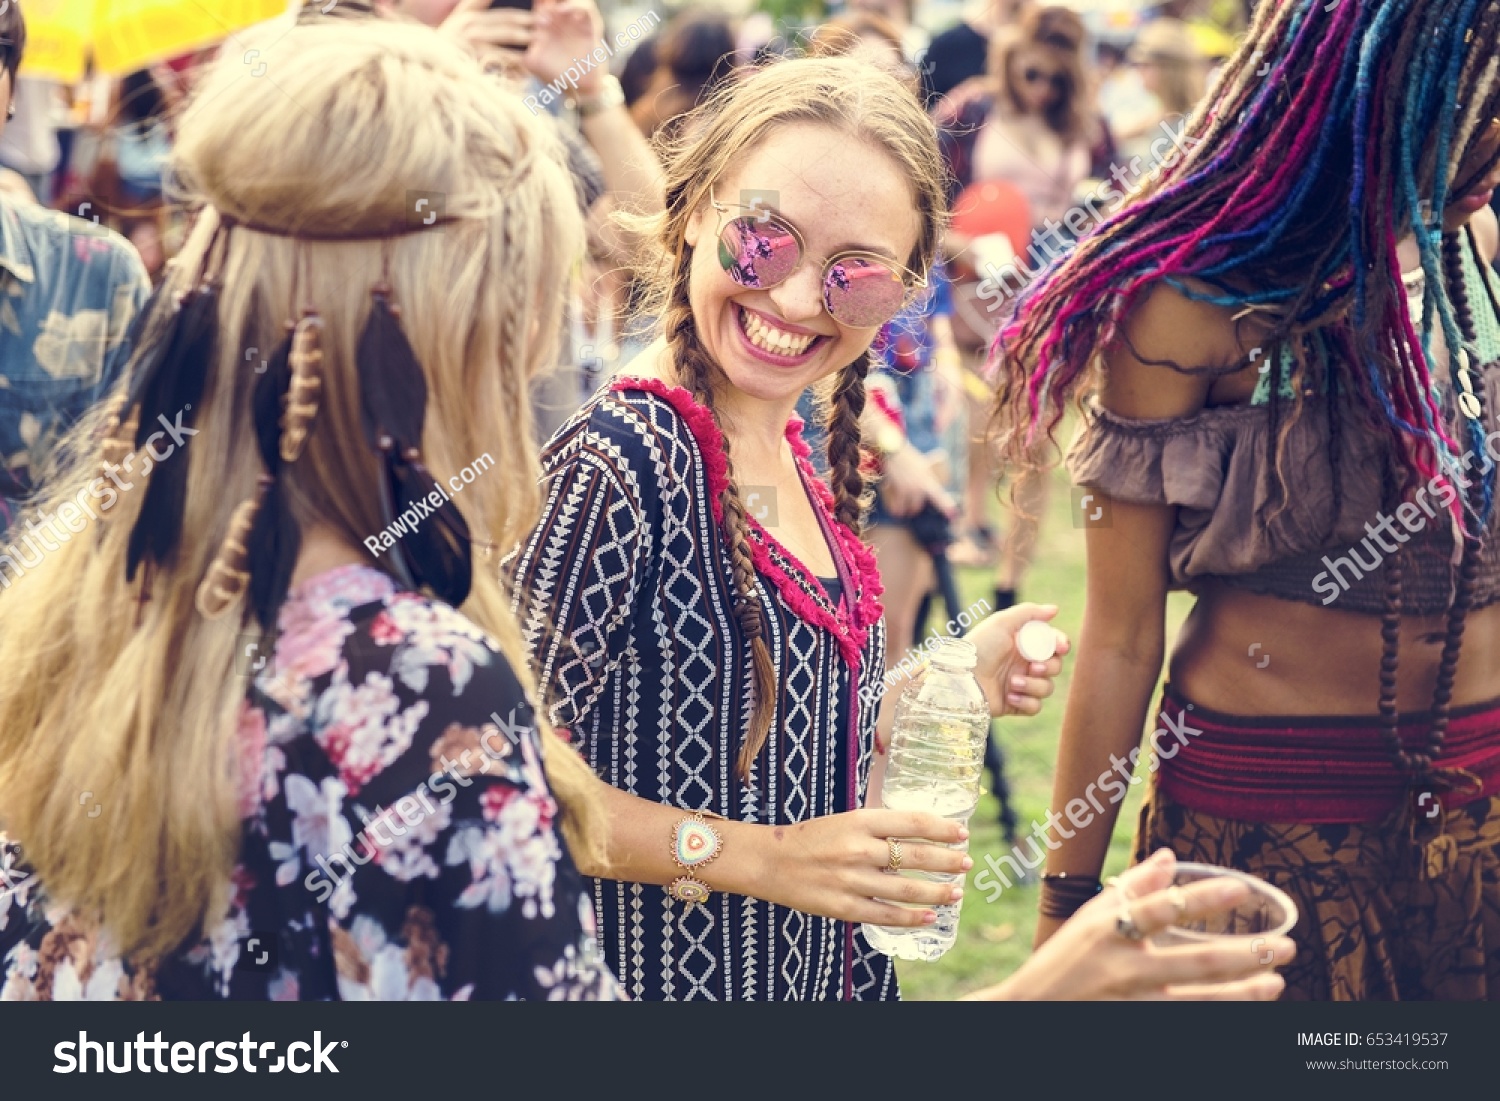 Group of Friends Drinking Beers Enjoying Music Festival together #653419537